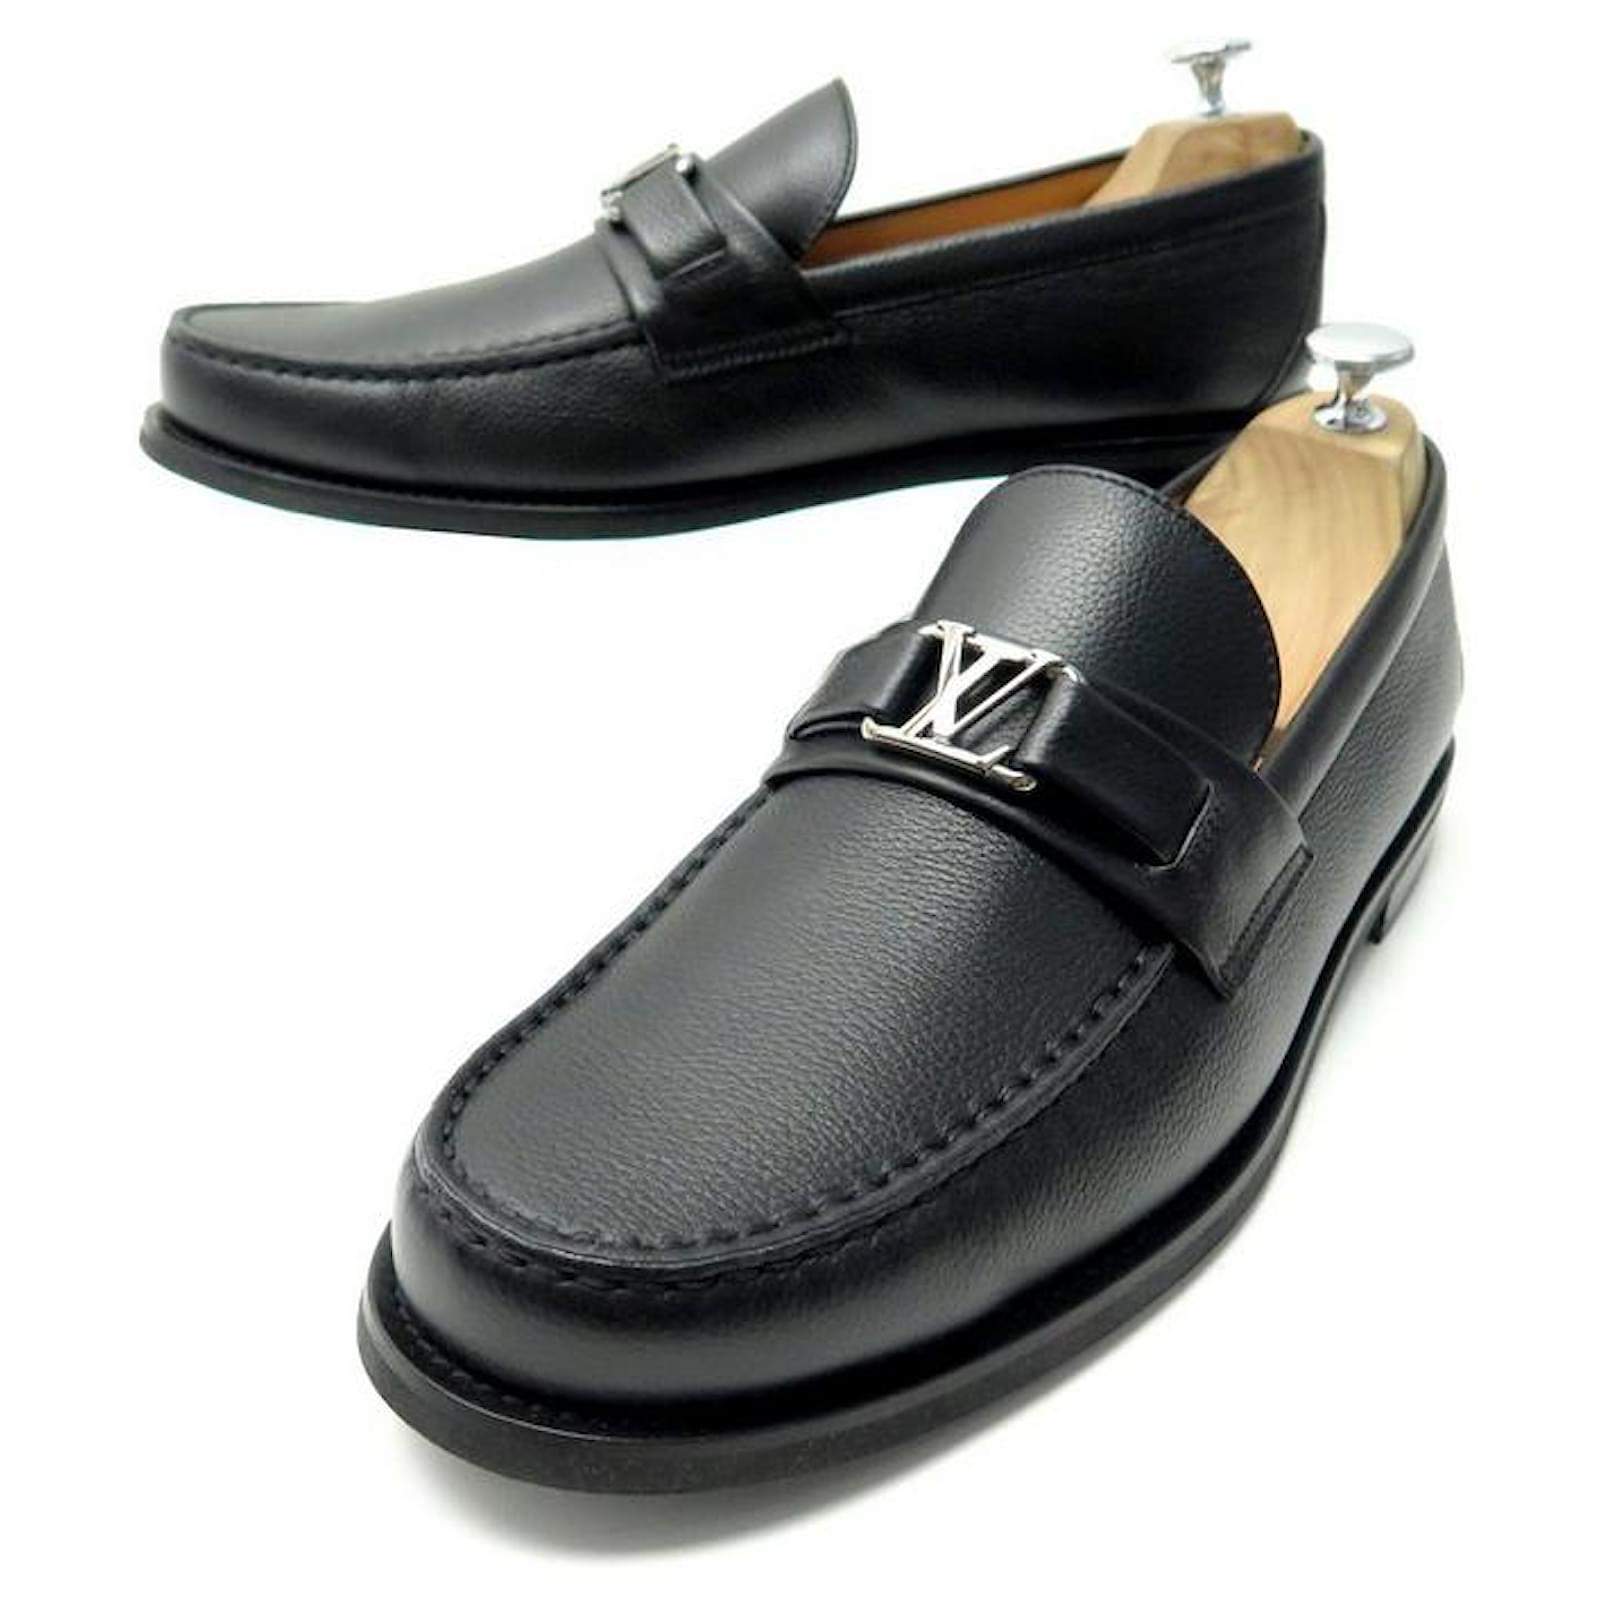 chaussures louis vuitton major loafer 9 43 1a2euj